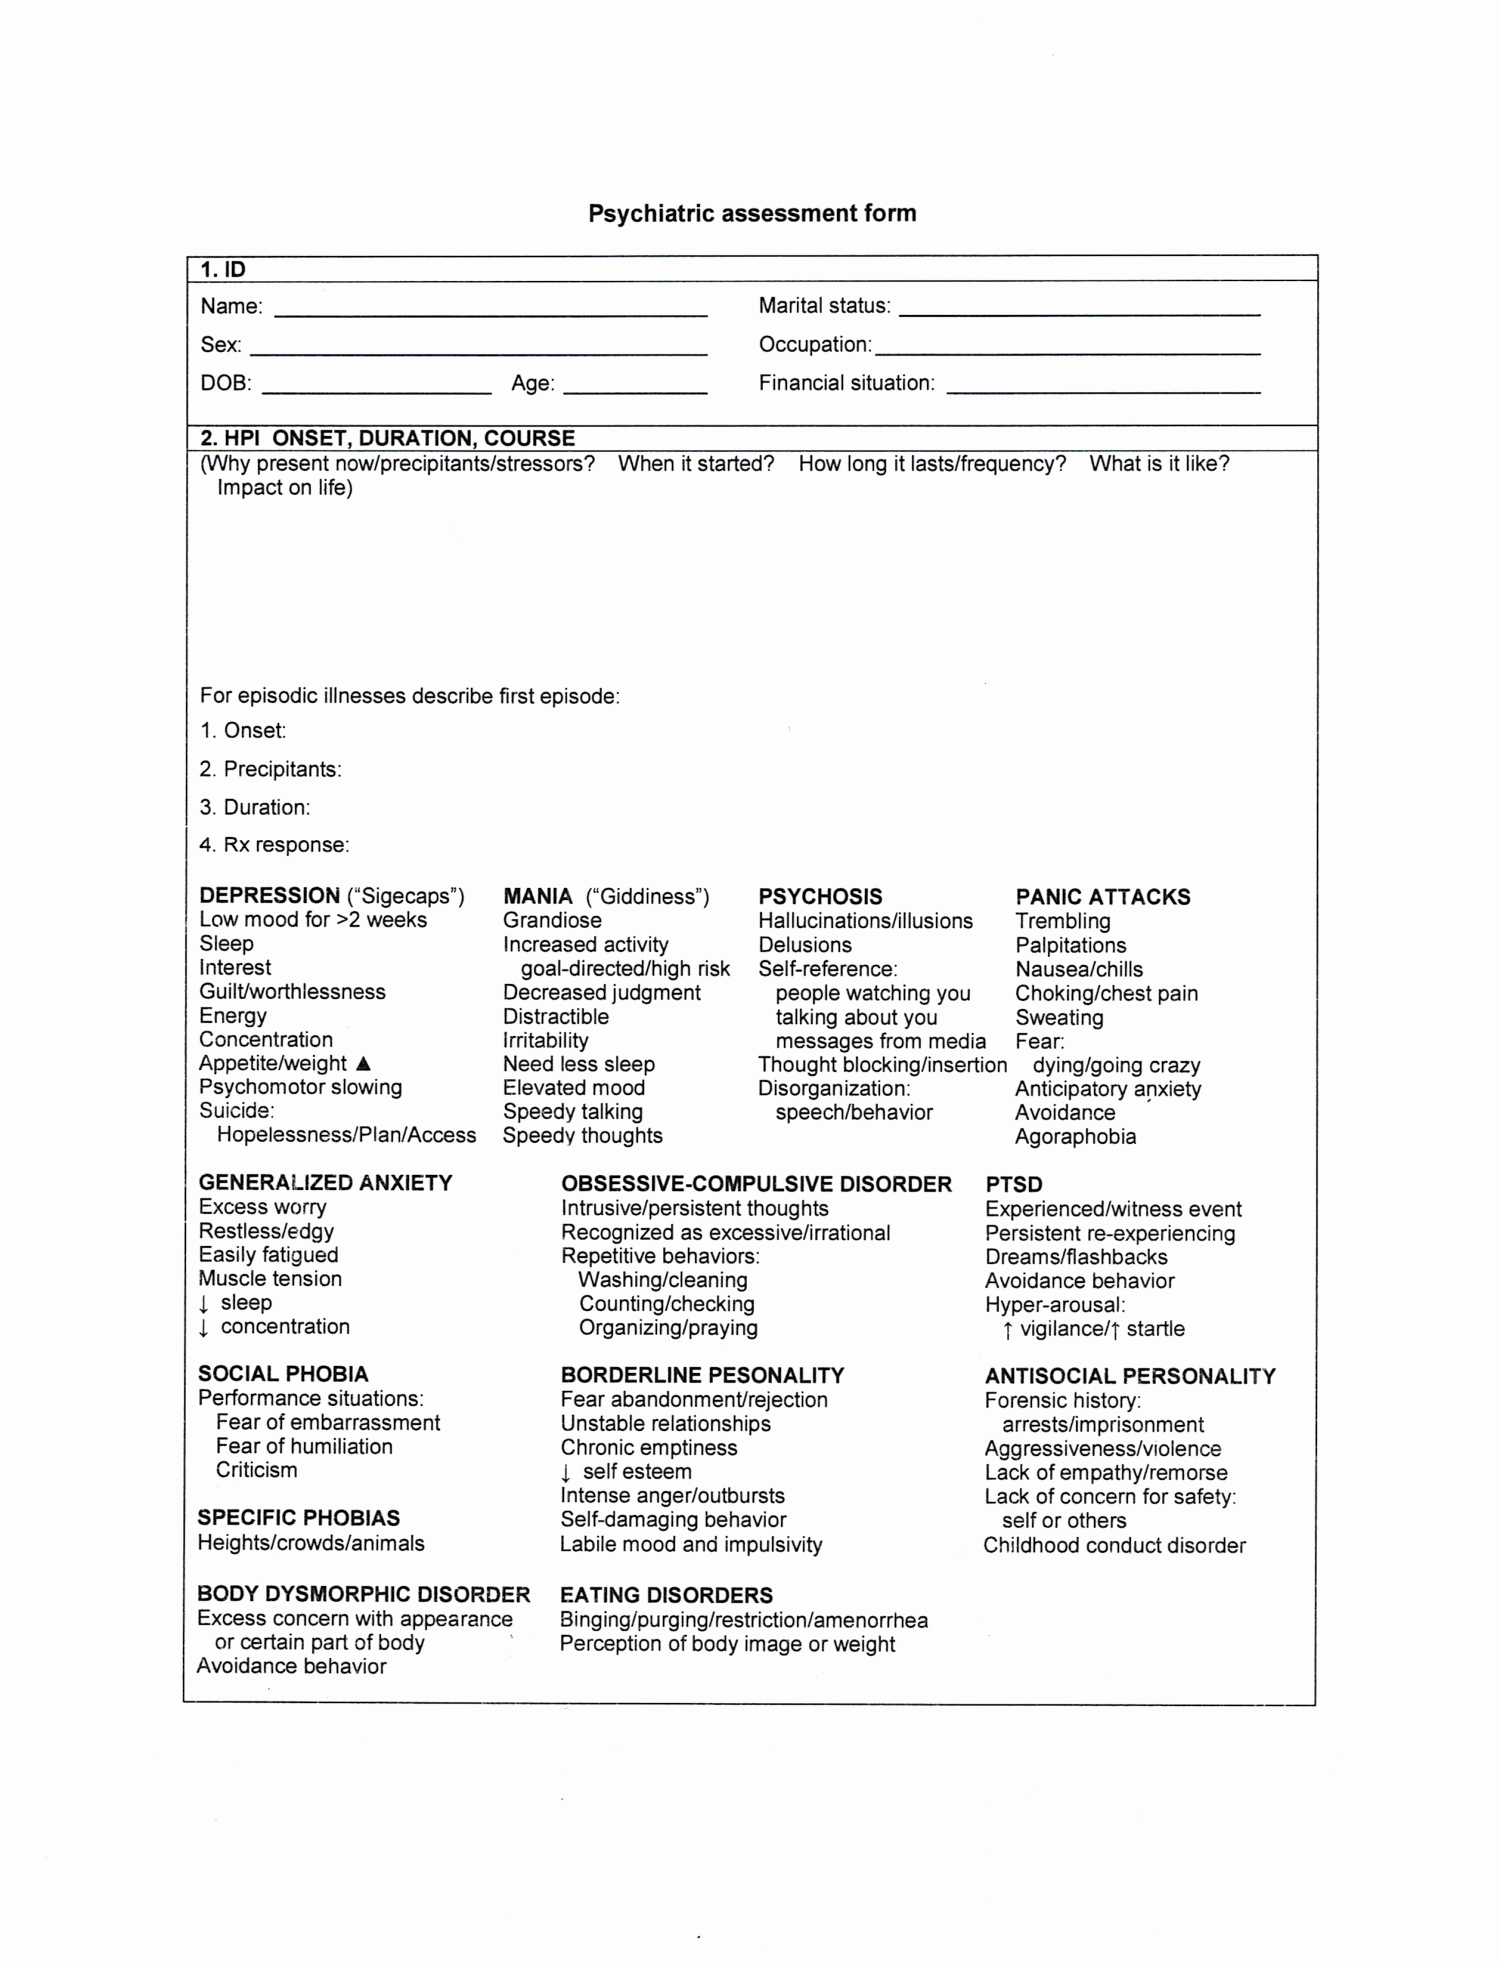 Psychiatric Evaluation form Template Luxury Psychiatric assessment form Juno Emr Support Portal